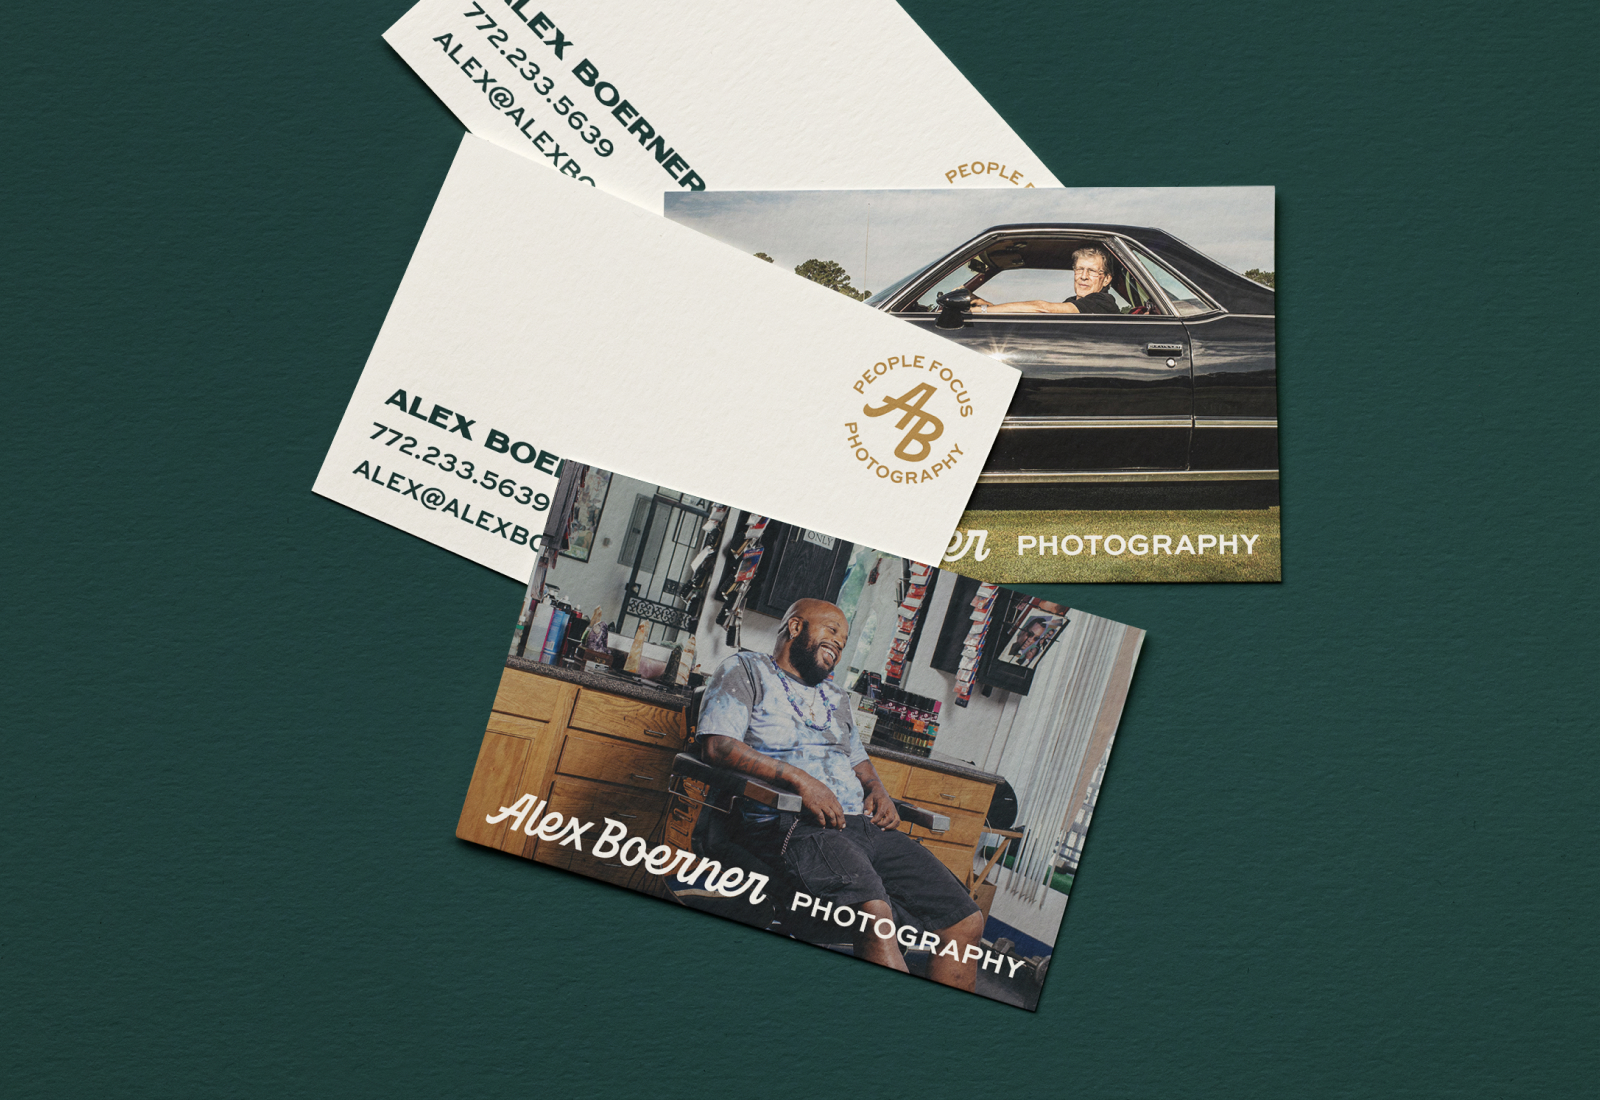 Business cards scattered on a table Alex Boerner Photography | Custom Lettered Logotype